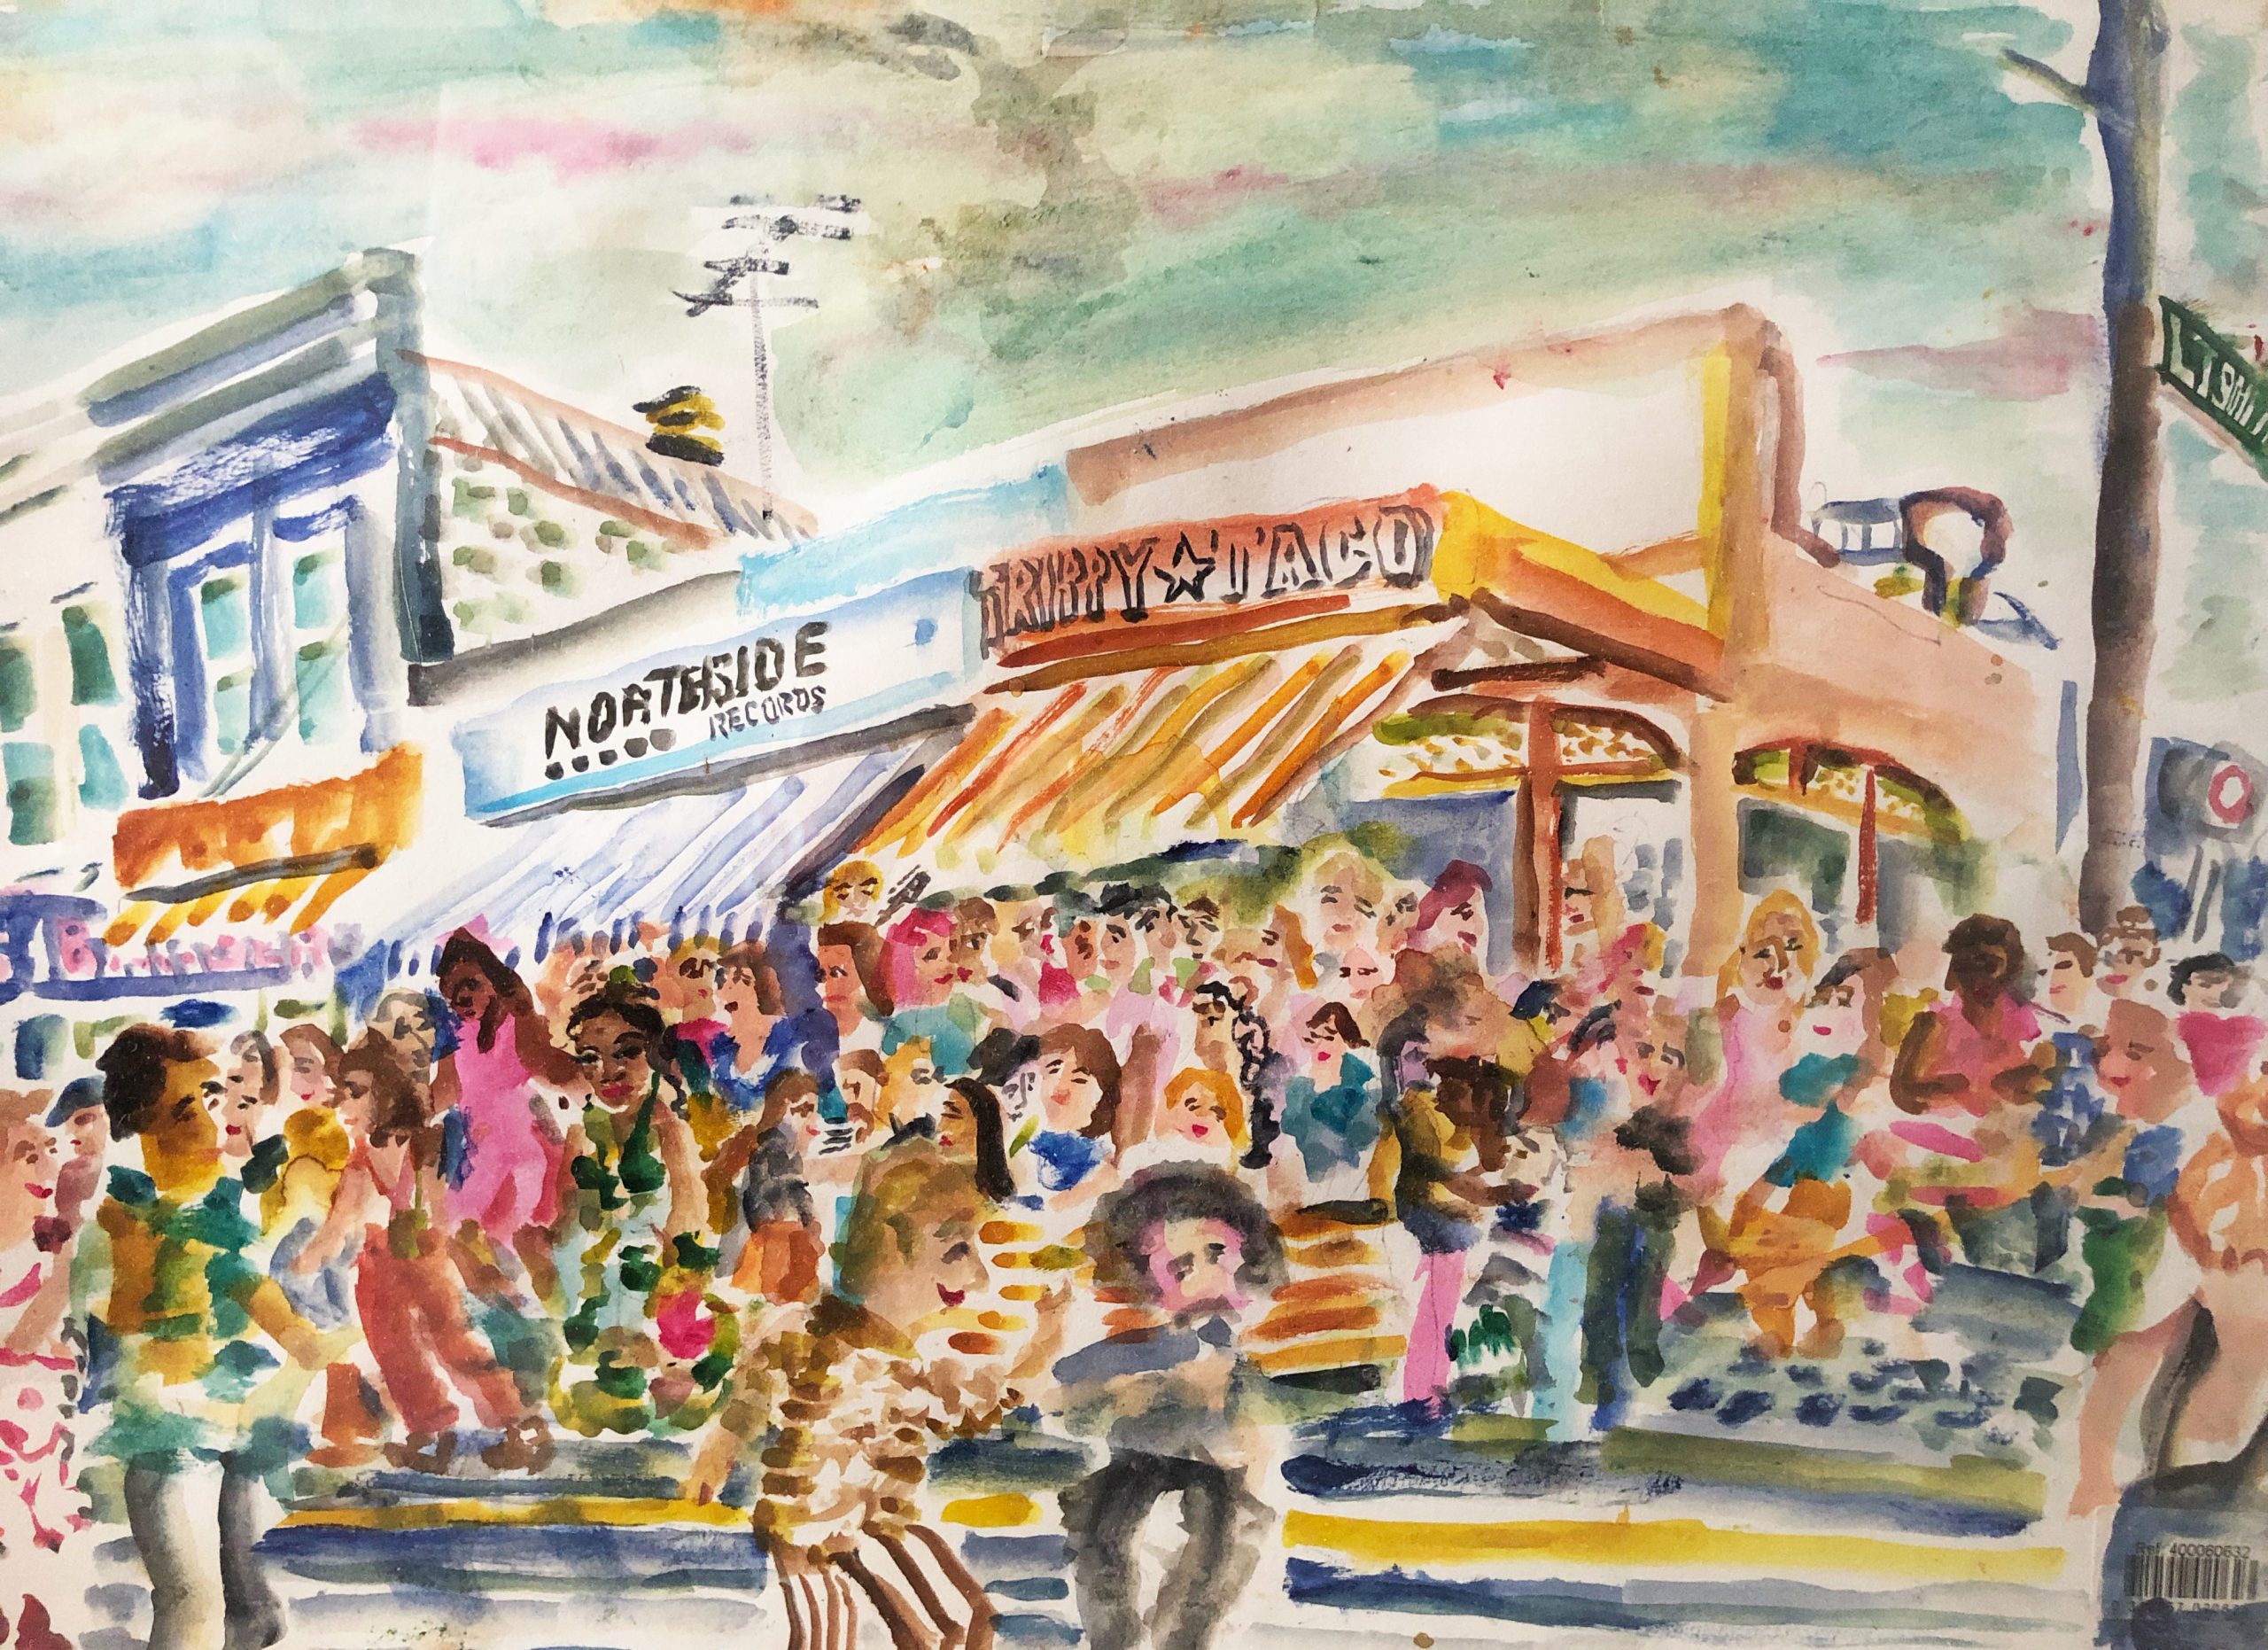 Painting of Northside Records by POL